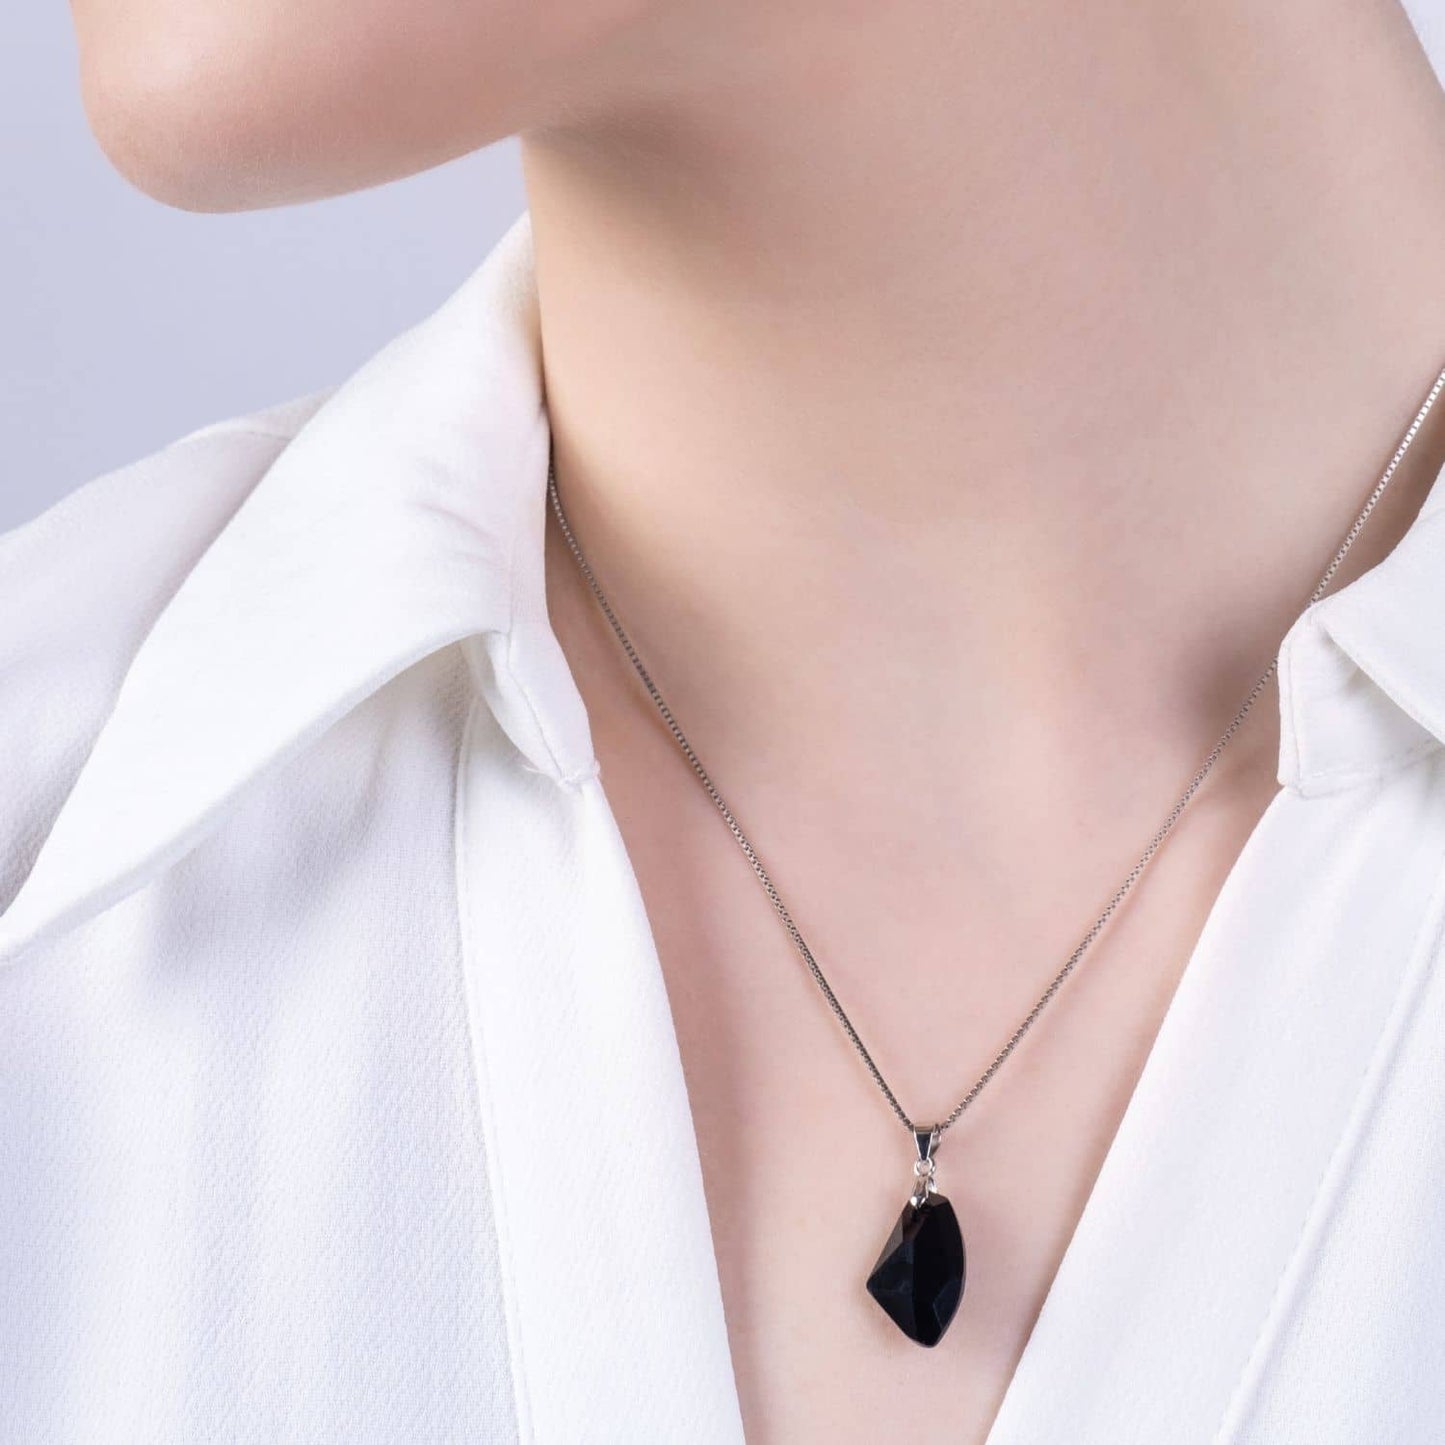 Obsidian Teardrop Necklace - Made with Austrian Crystals